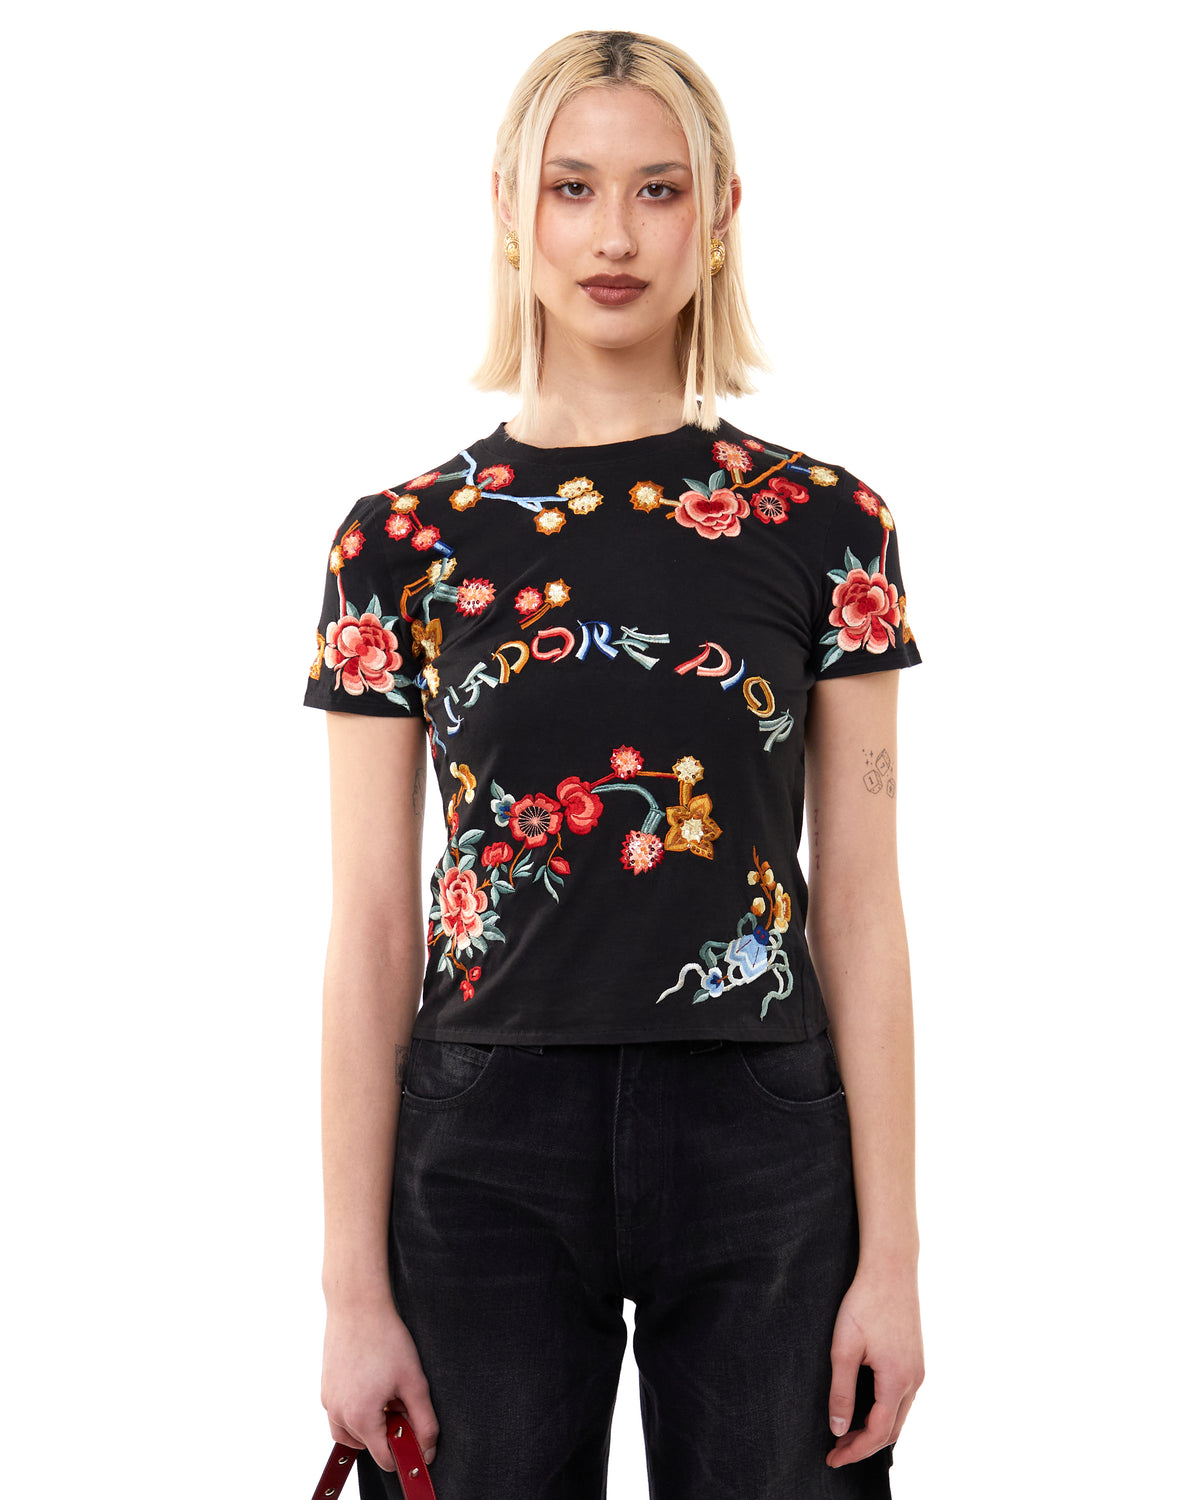 Pre-Owned Floral Embroidered J'adore Dior T-Shirt